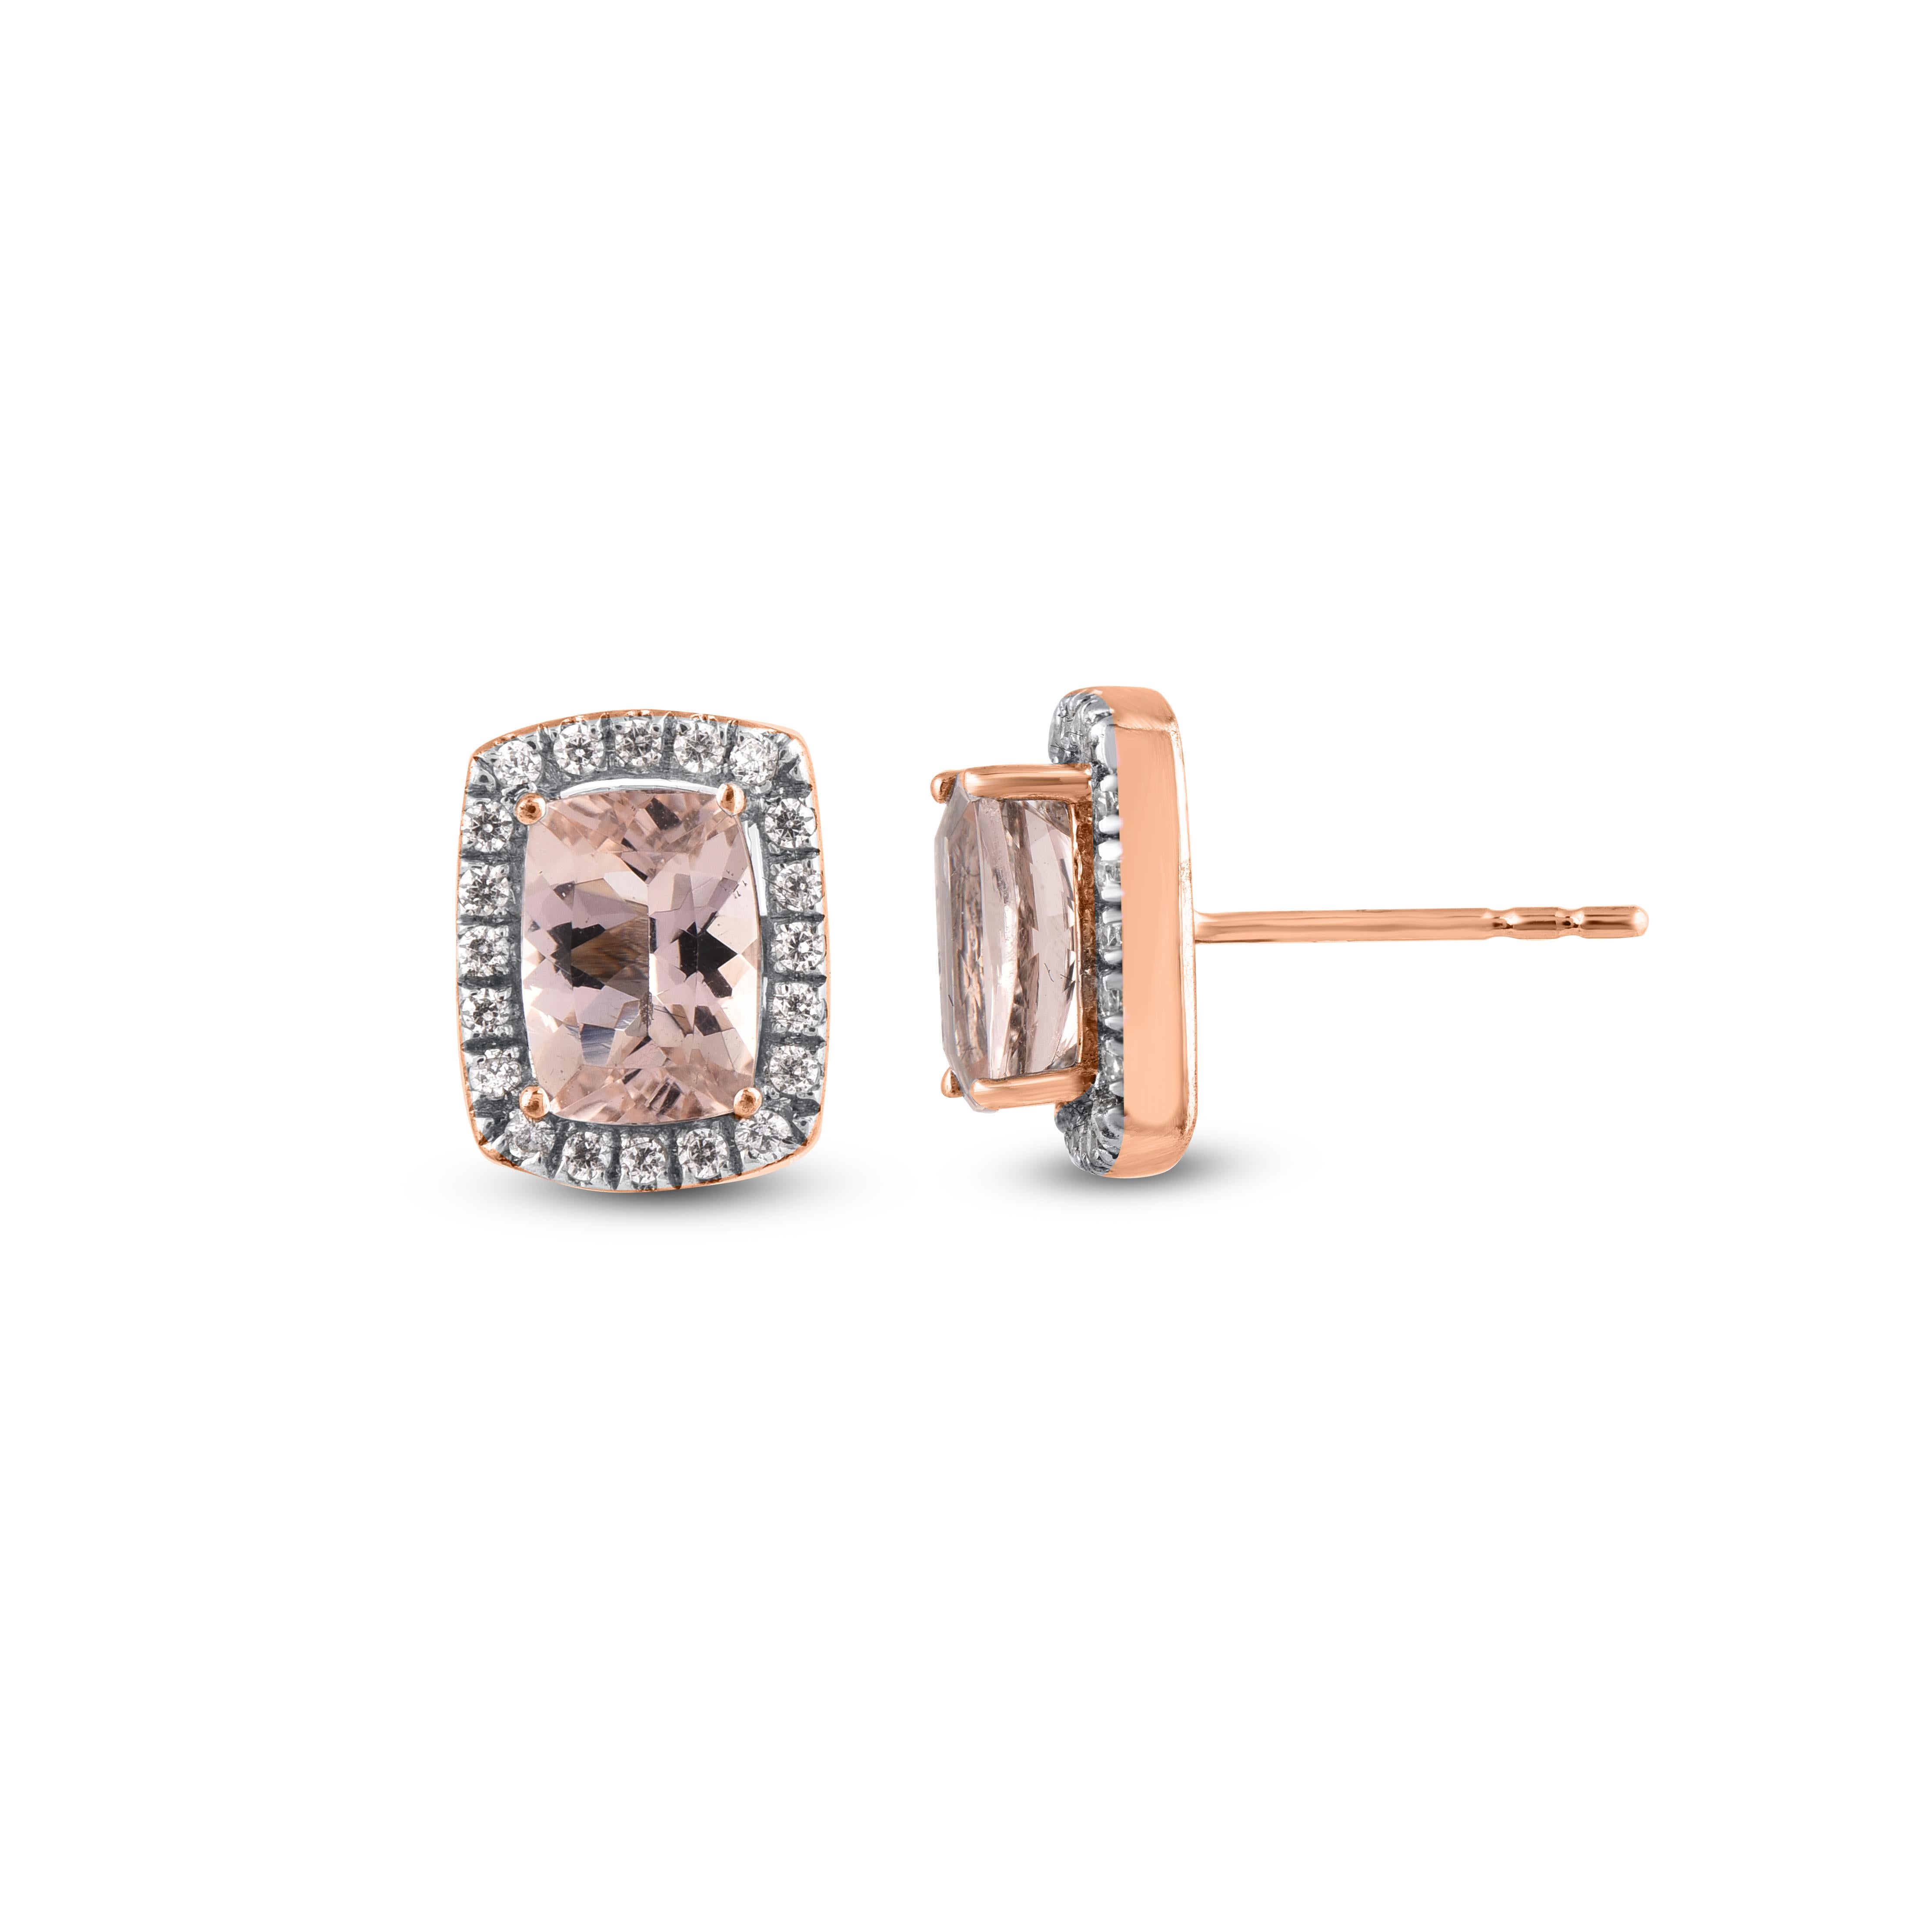 Just her style, these sparkling diamond stud earrings are certain to dazzle and delight. Handcrafted by our experts in 14 karat rose gold and studded with 40 round brilliant cut and 2 cushion cut morganite in pave and prong setting, glitters in H-I